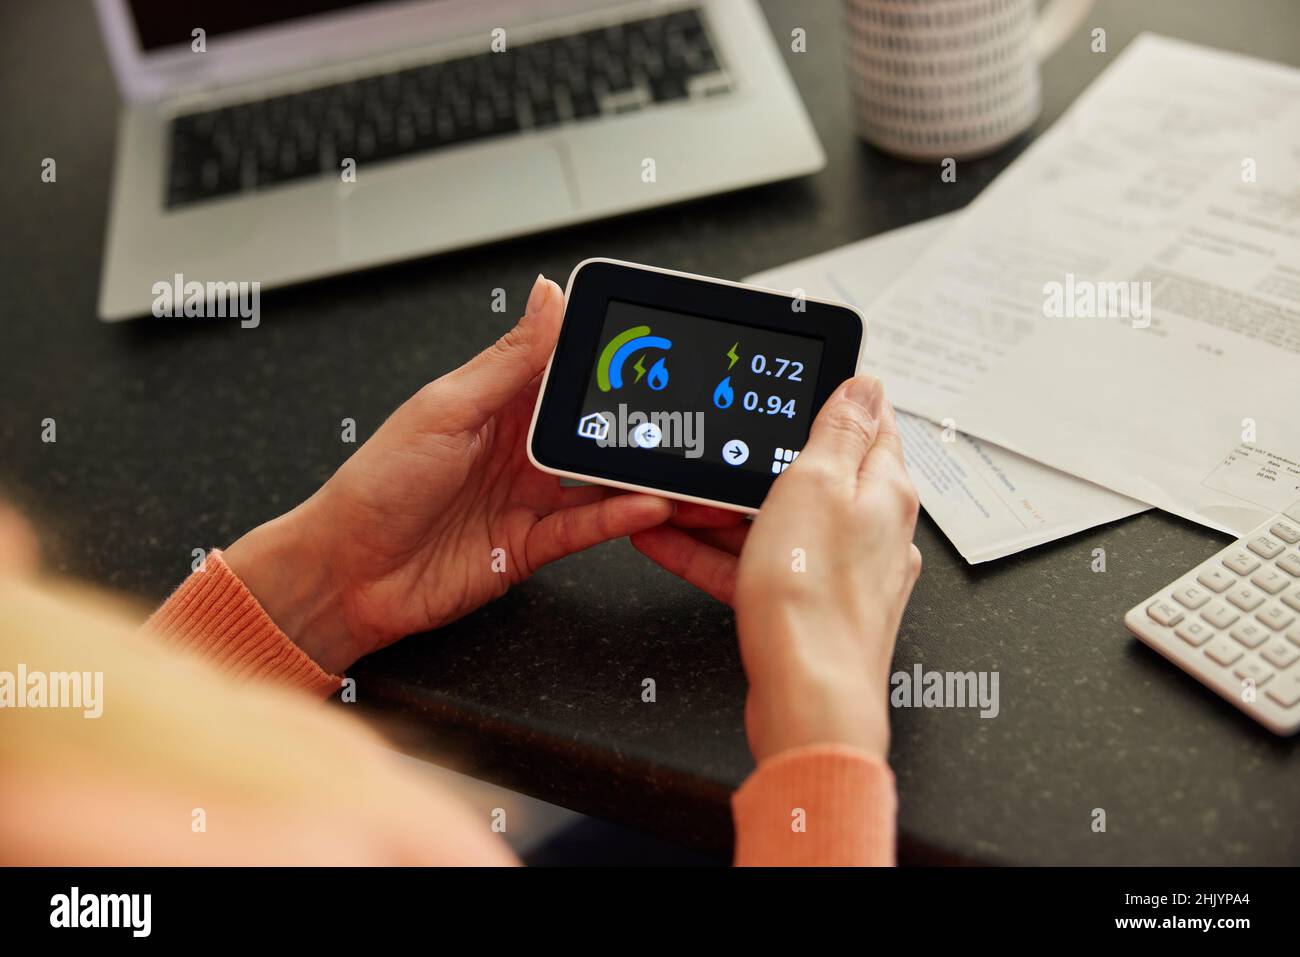 Close Up Of Woman Holding Smart Energy Meter In Kitchen Measuring Electricity And Gas Use With Bills With Calculator Stock Photo